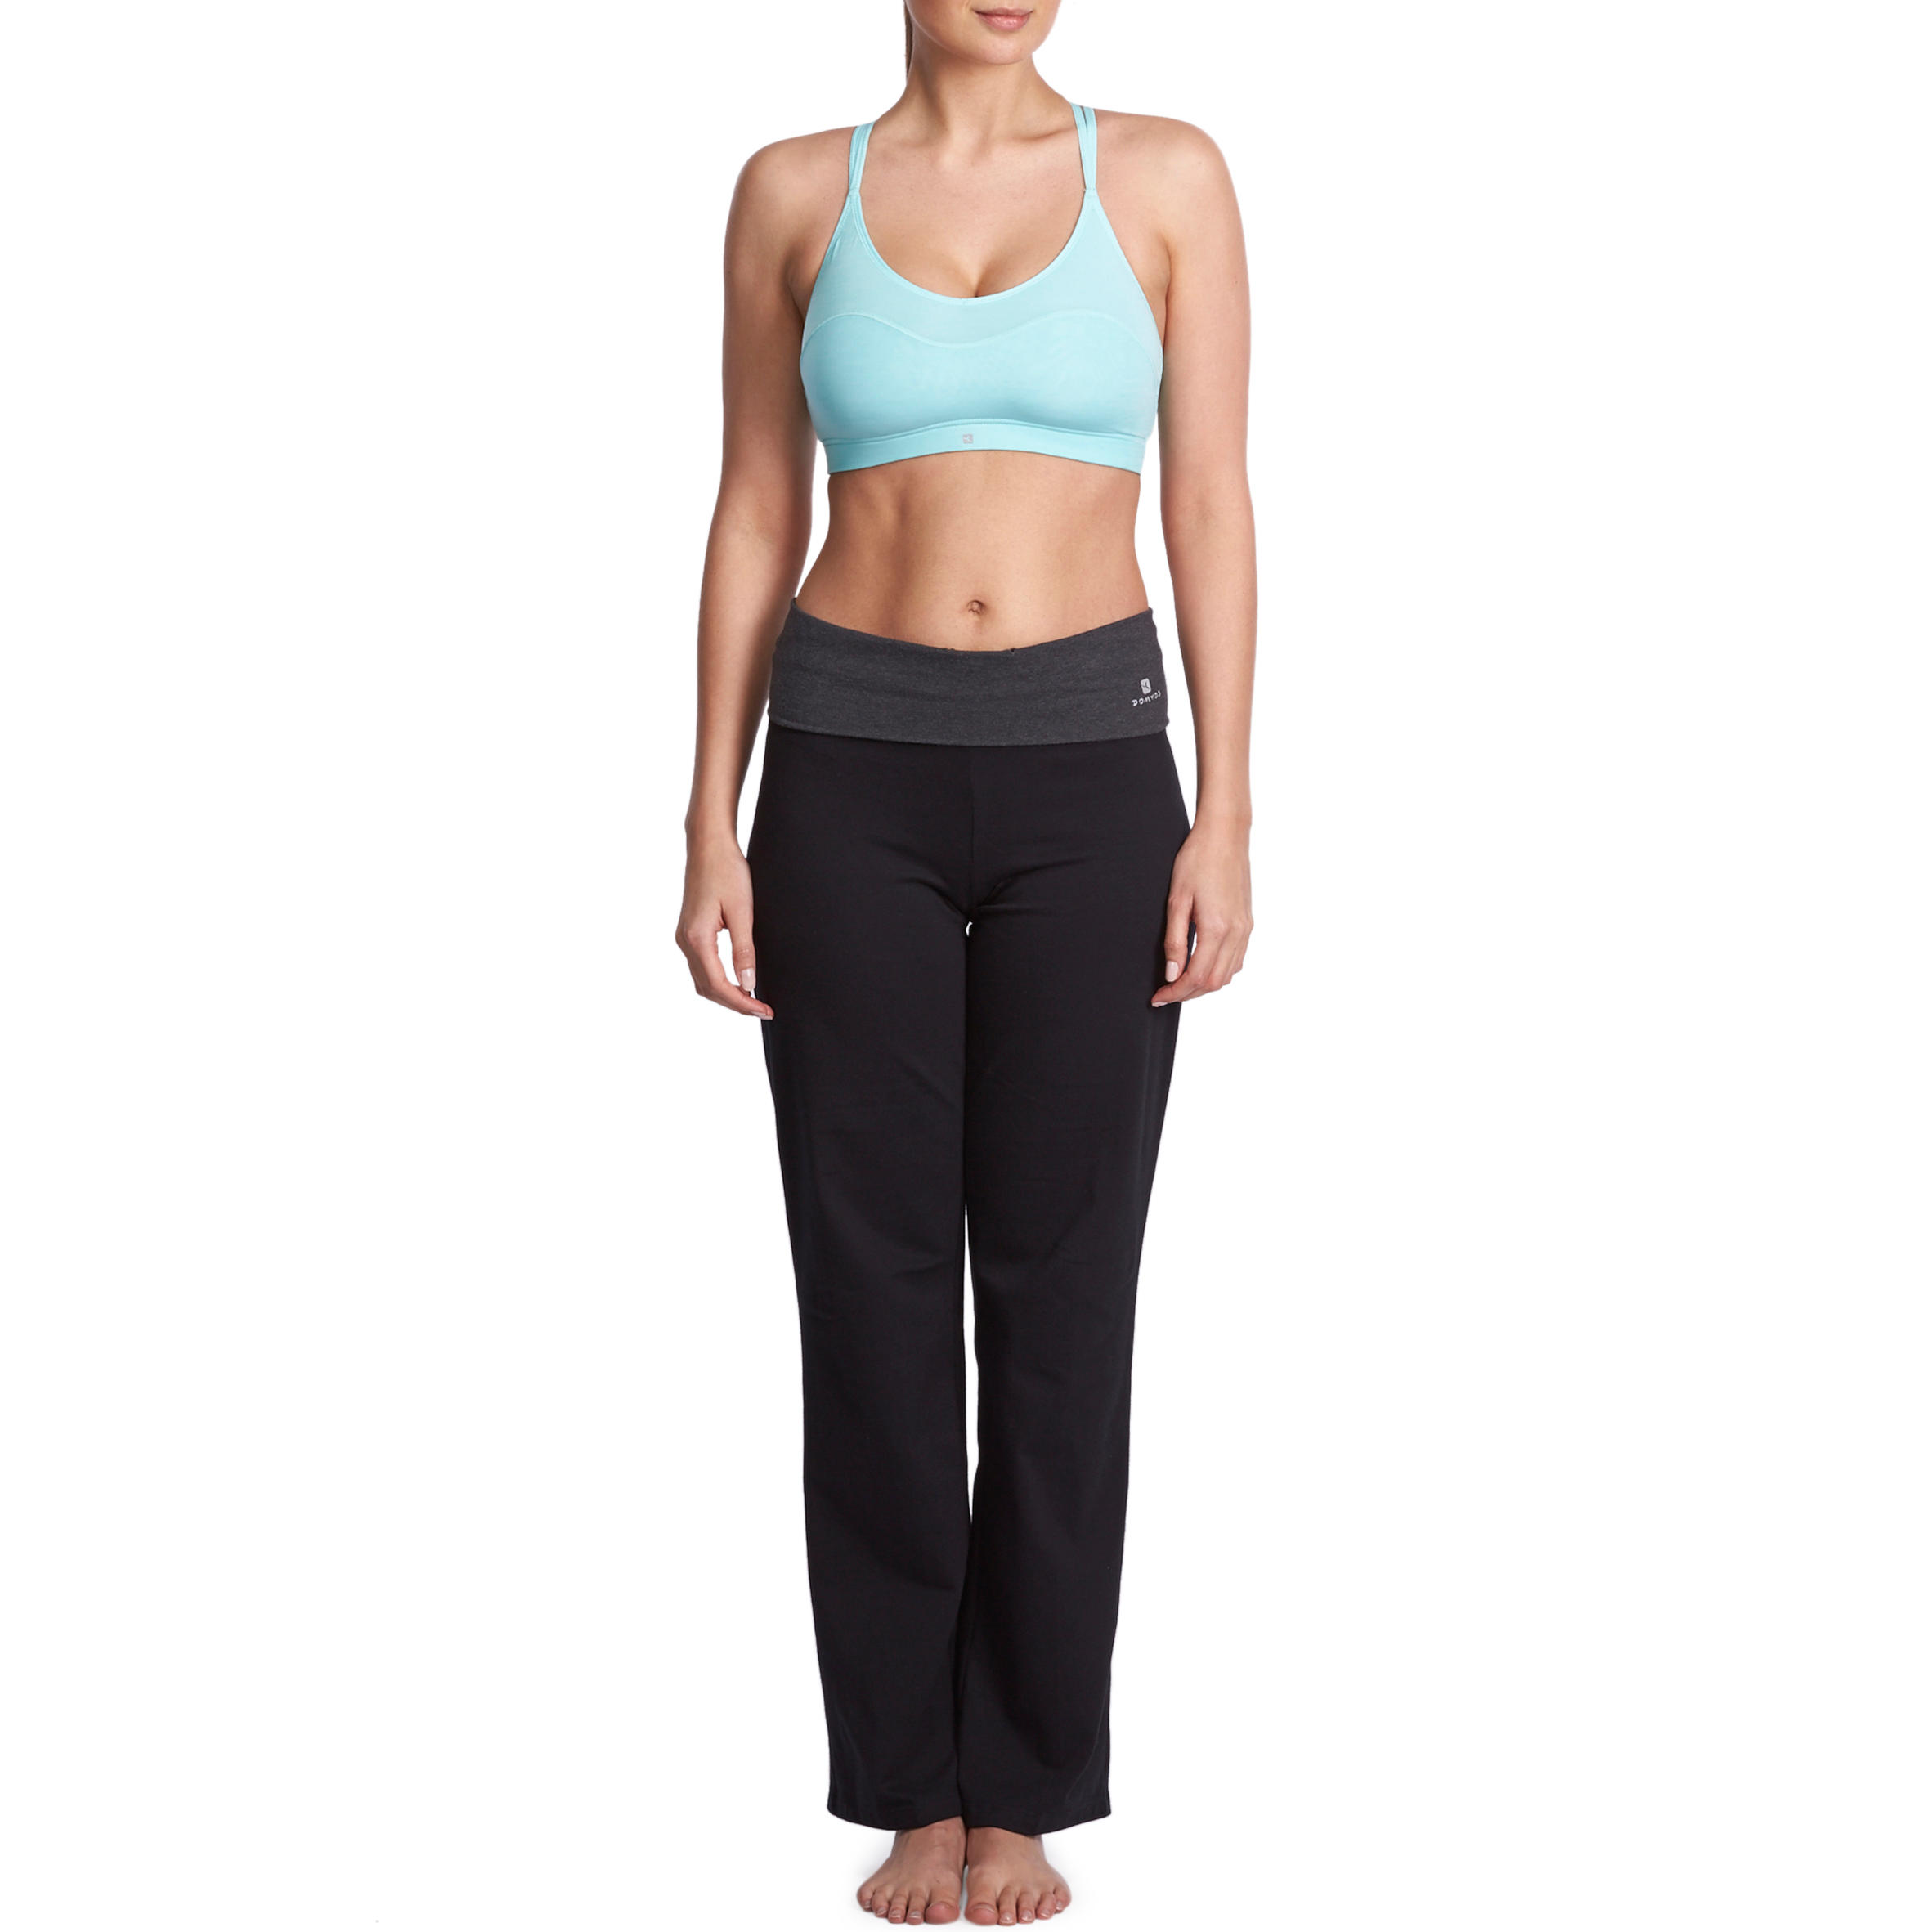 Yoga Outfit Decathlon Online  International Society of Precision